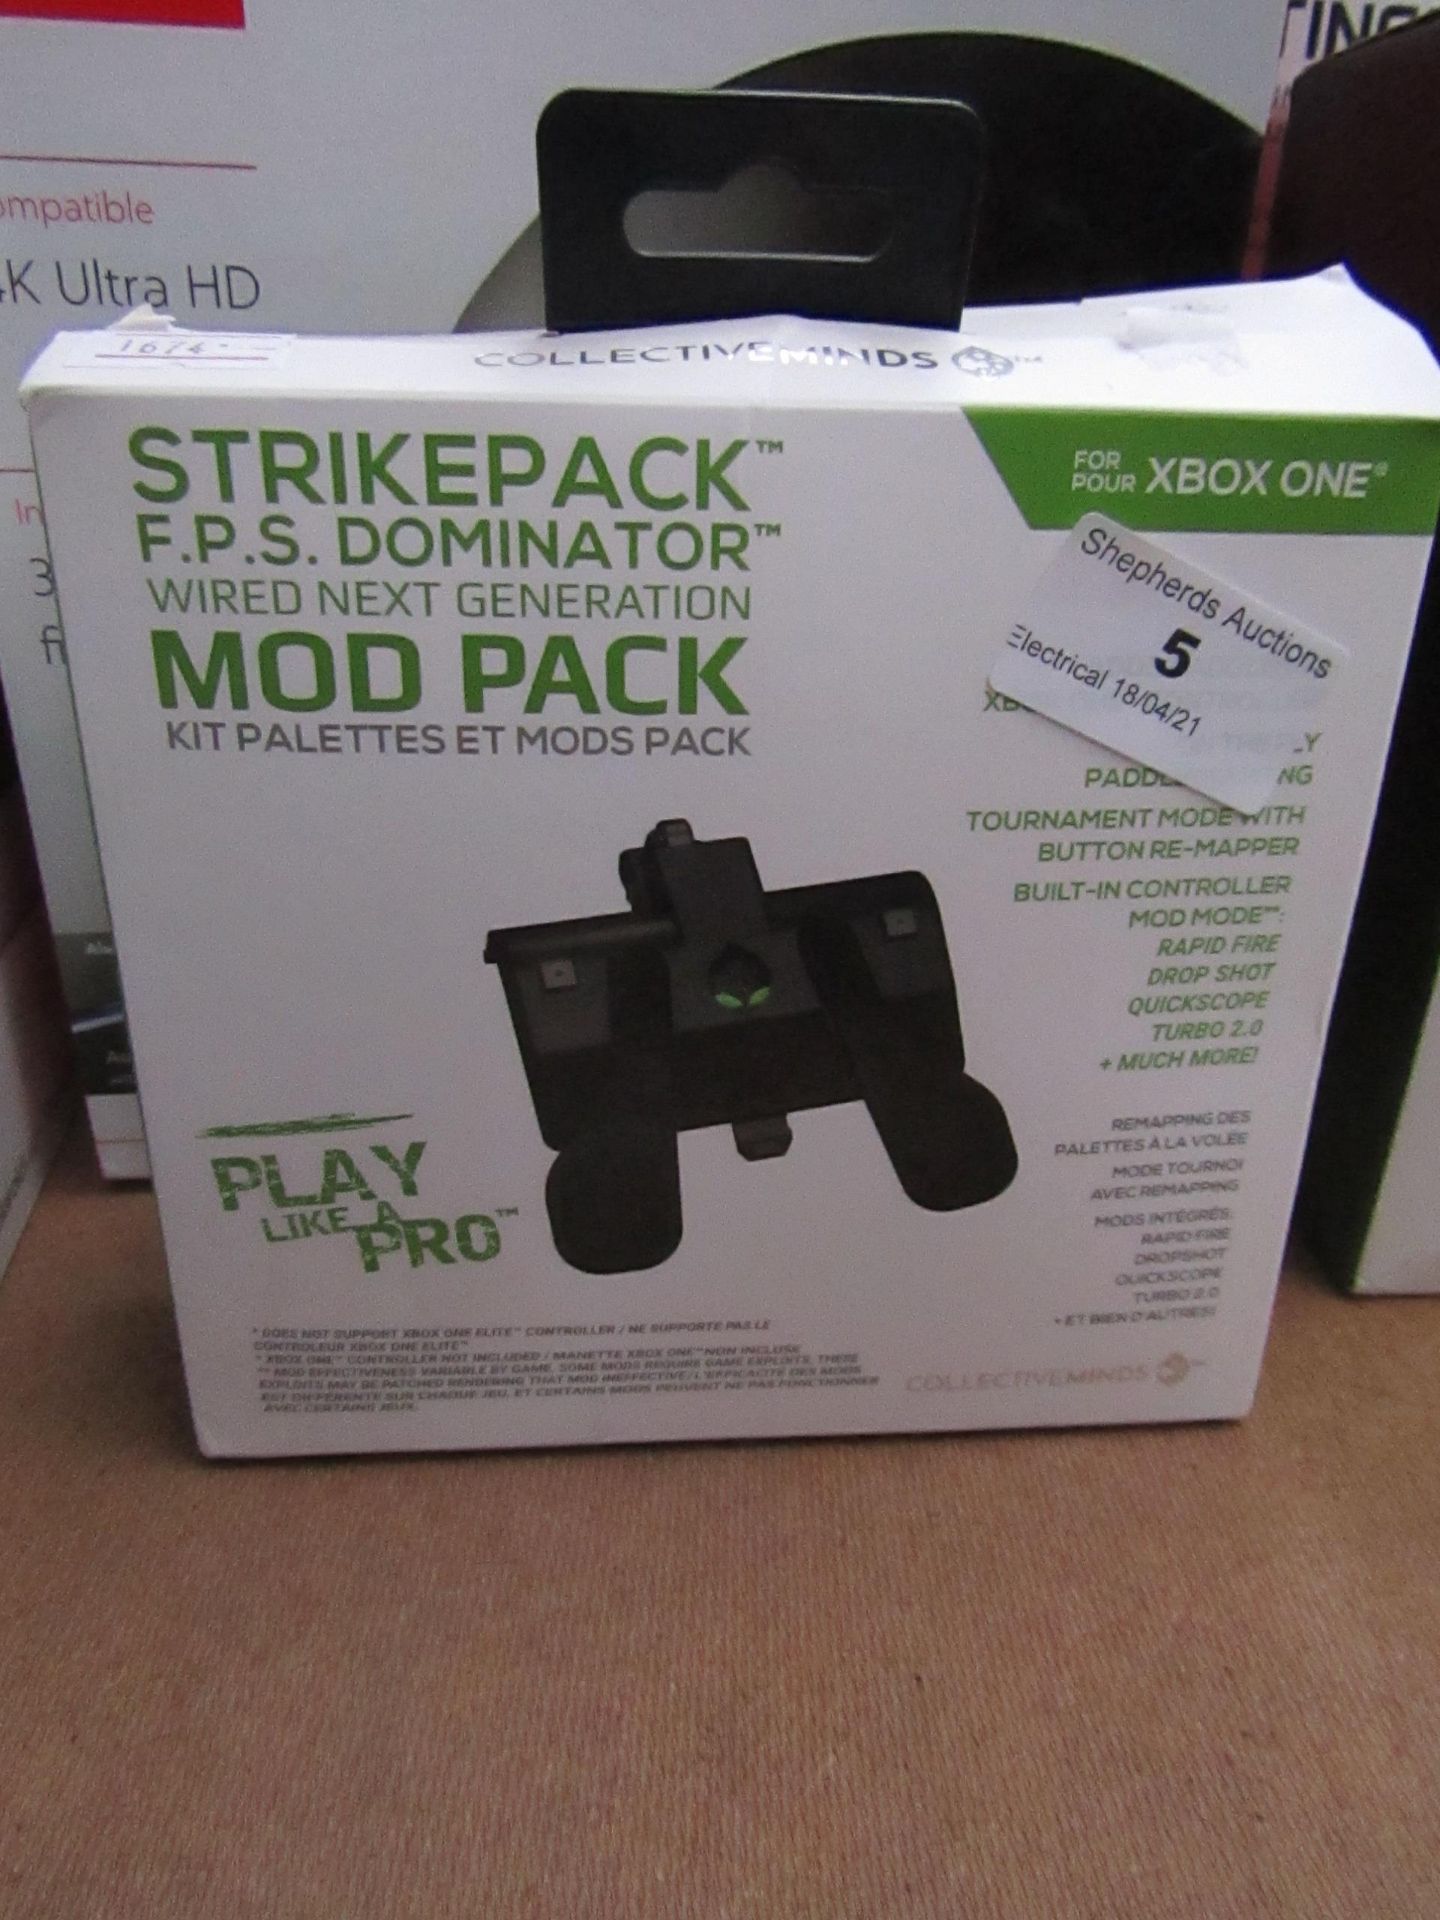 StrikePack F.P.S Dominator Wired Next Generation Mod Pack Unchecked & boxed